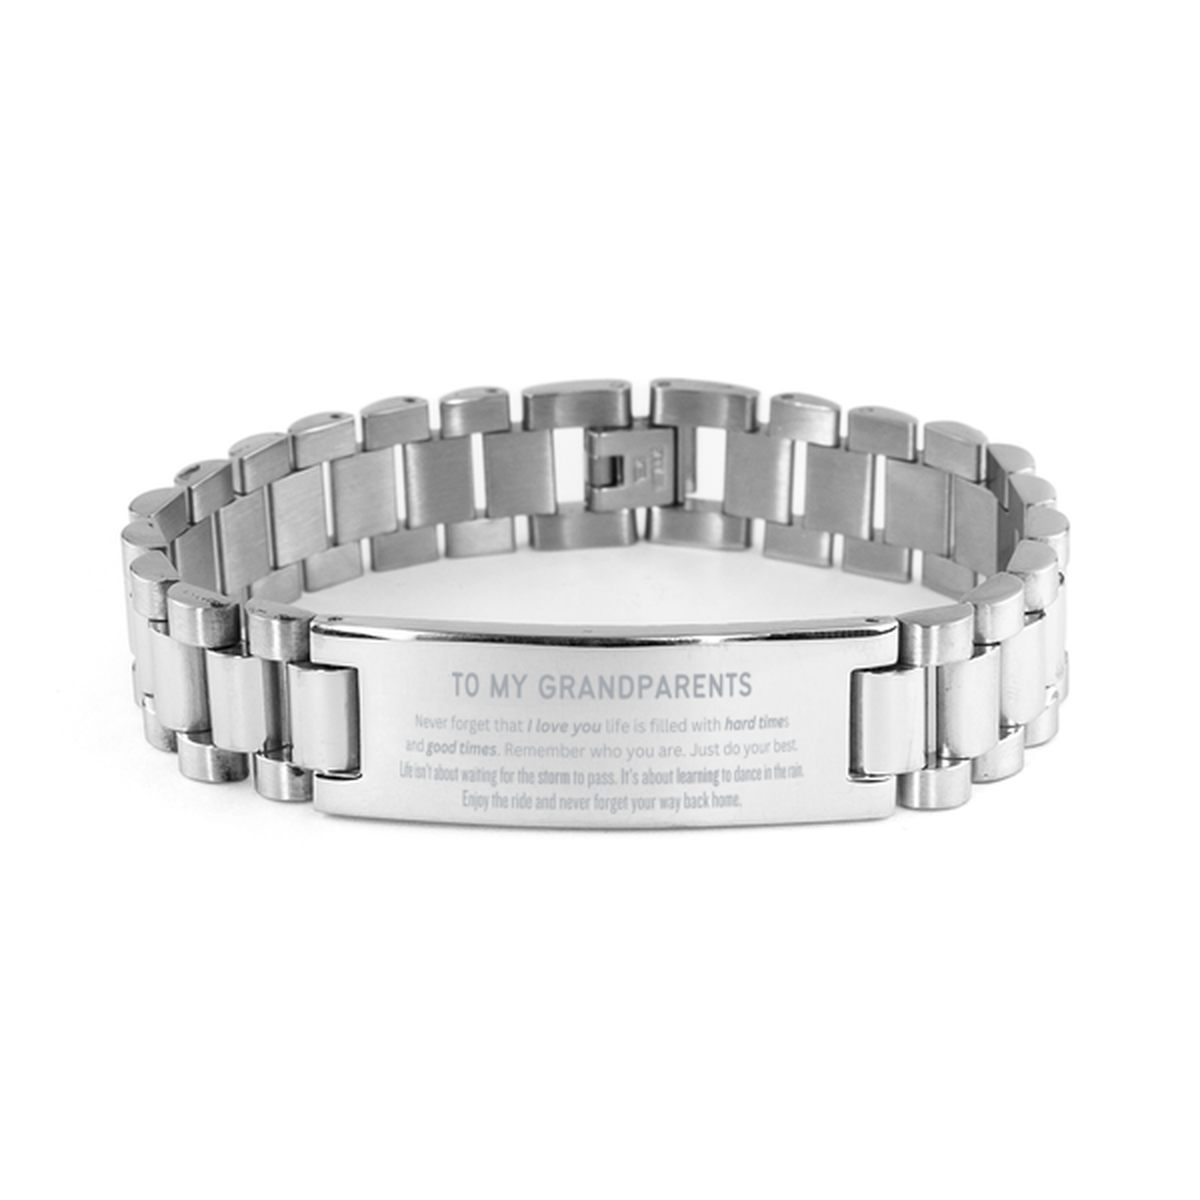 Christmas Grandparents Ladder Stainless Steel Bracelet Gifts, To My Grandparents Birthday Thank You Gifts For Grandparents, Graduation Unique Gifts For Grandparents To My Grandparents Never forget that I love you life is filled with hard times and good ti